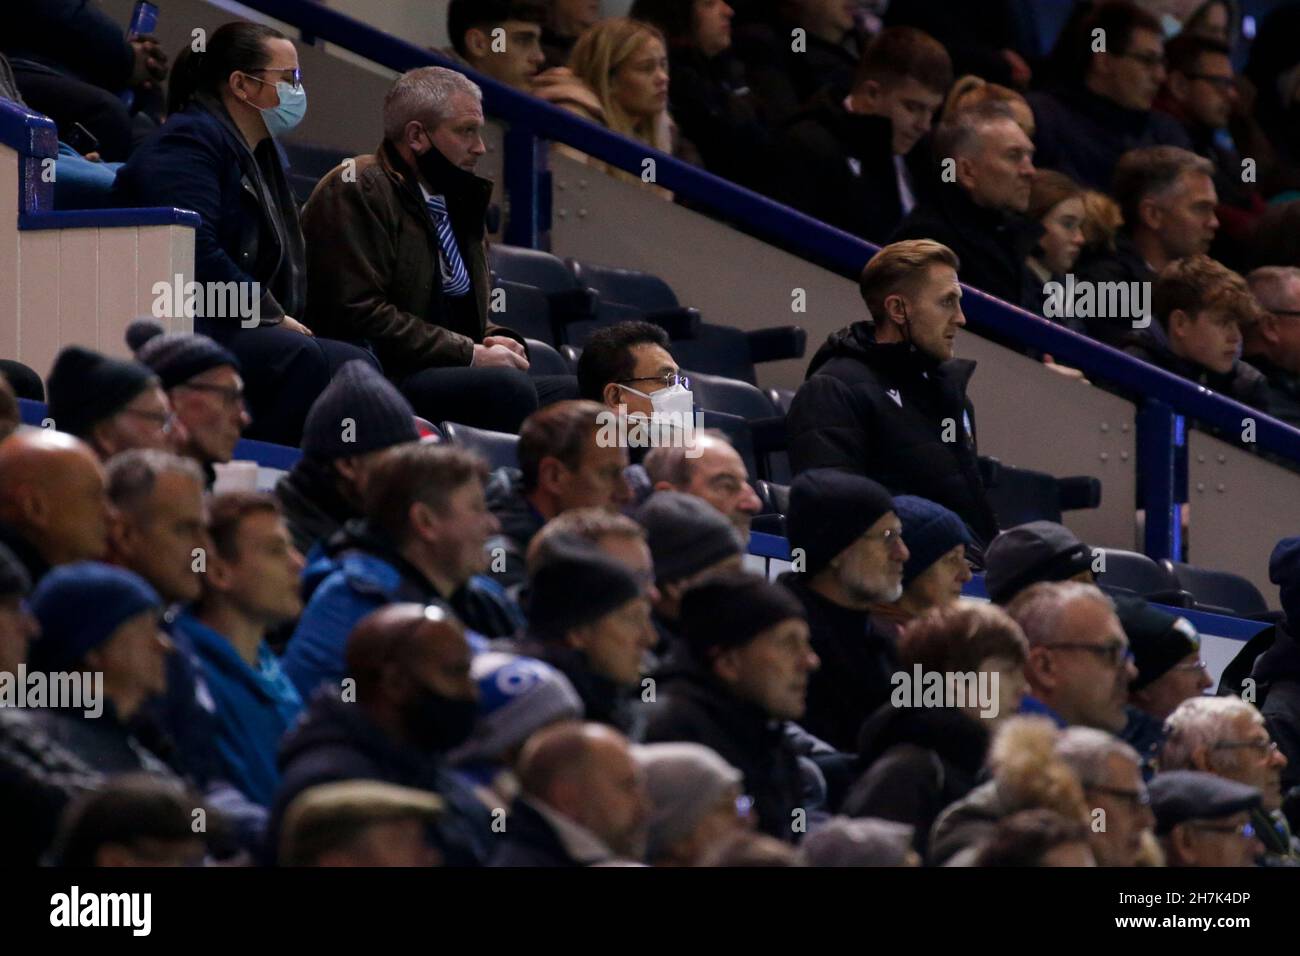 Sheffield, UK. 23rd Nov, 2021. Sheffield Wednesday Chairman Dejphon Chansiri in attendance at tonights game in Sheffield, United Kingdom on 11/23/2021. (Photo by Ben Early/News Images/Sipa USA) Credit: Sipa USA/Alamy Live News Stock Photo